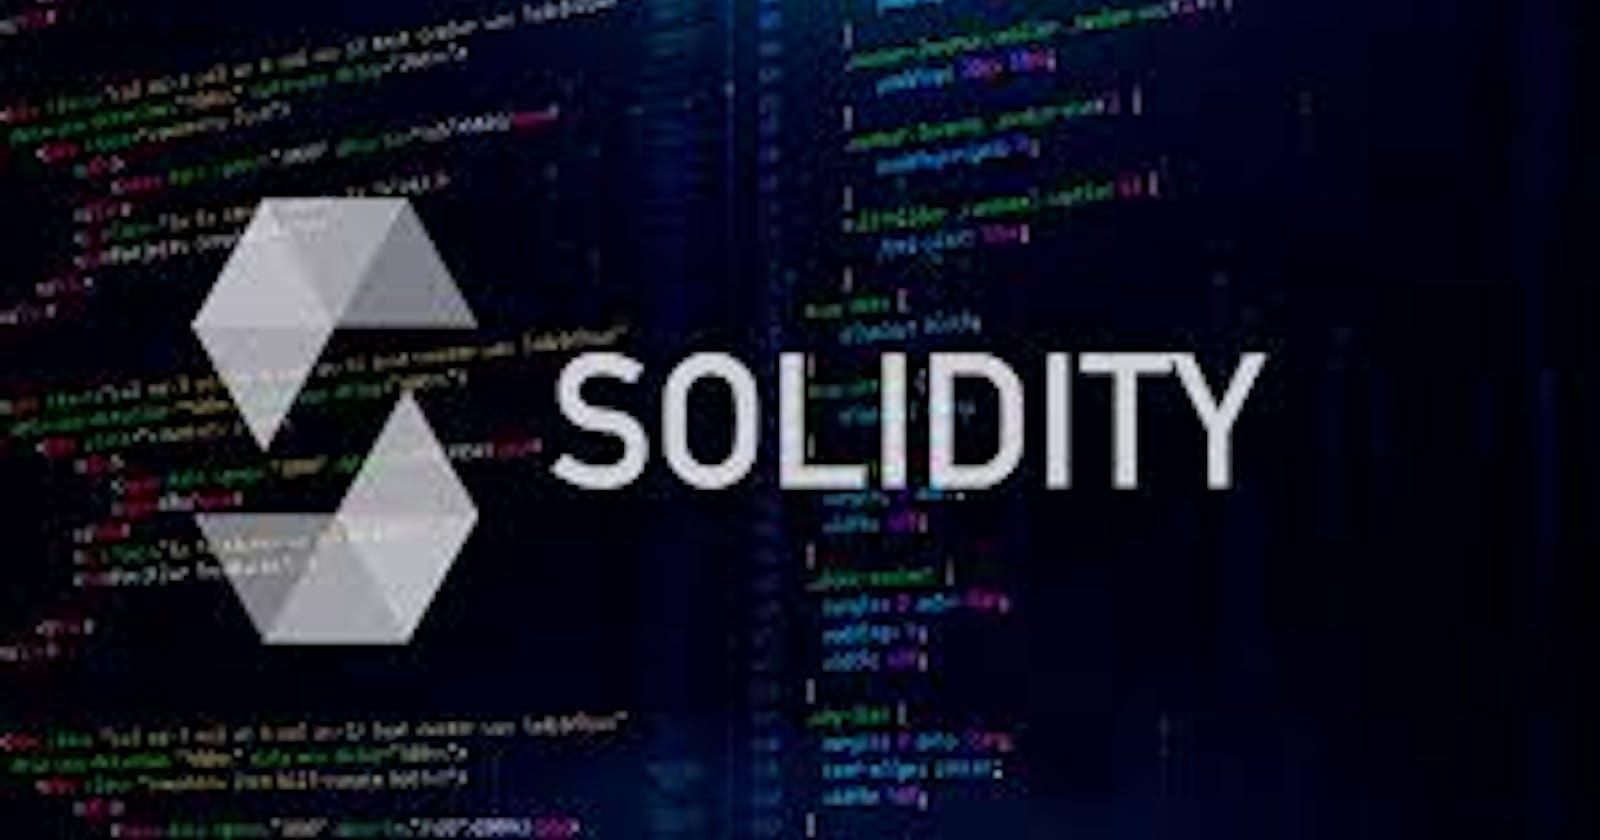 Introduction to the Solidity Programming Language